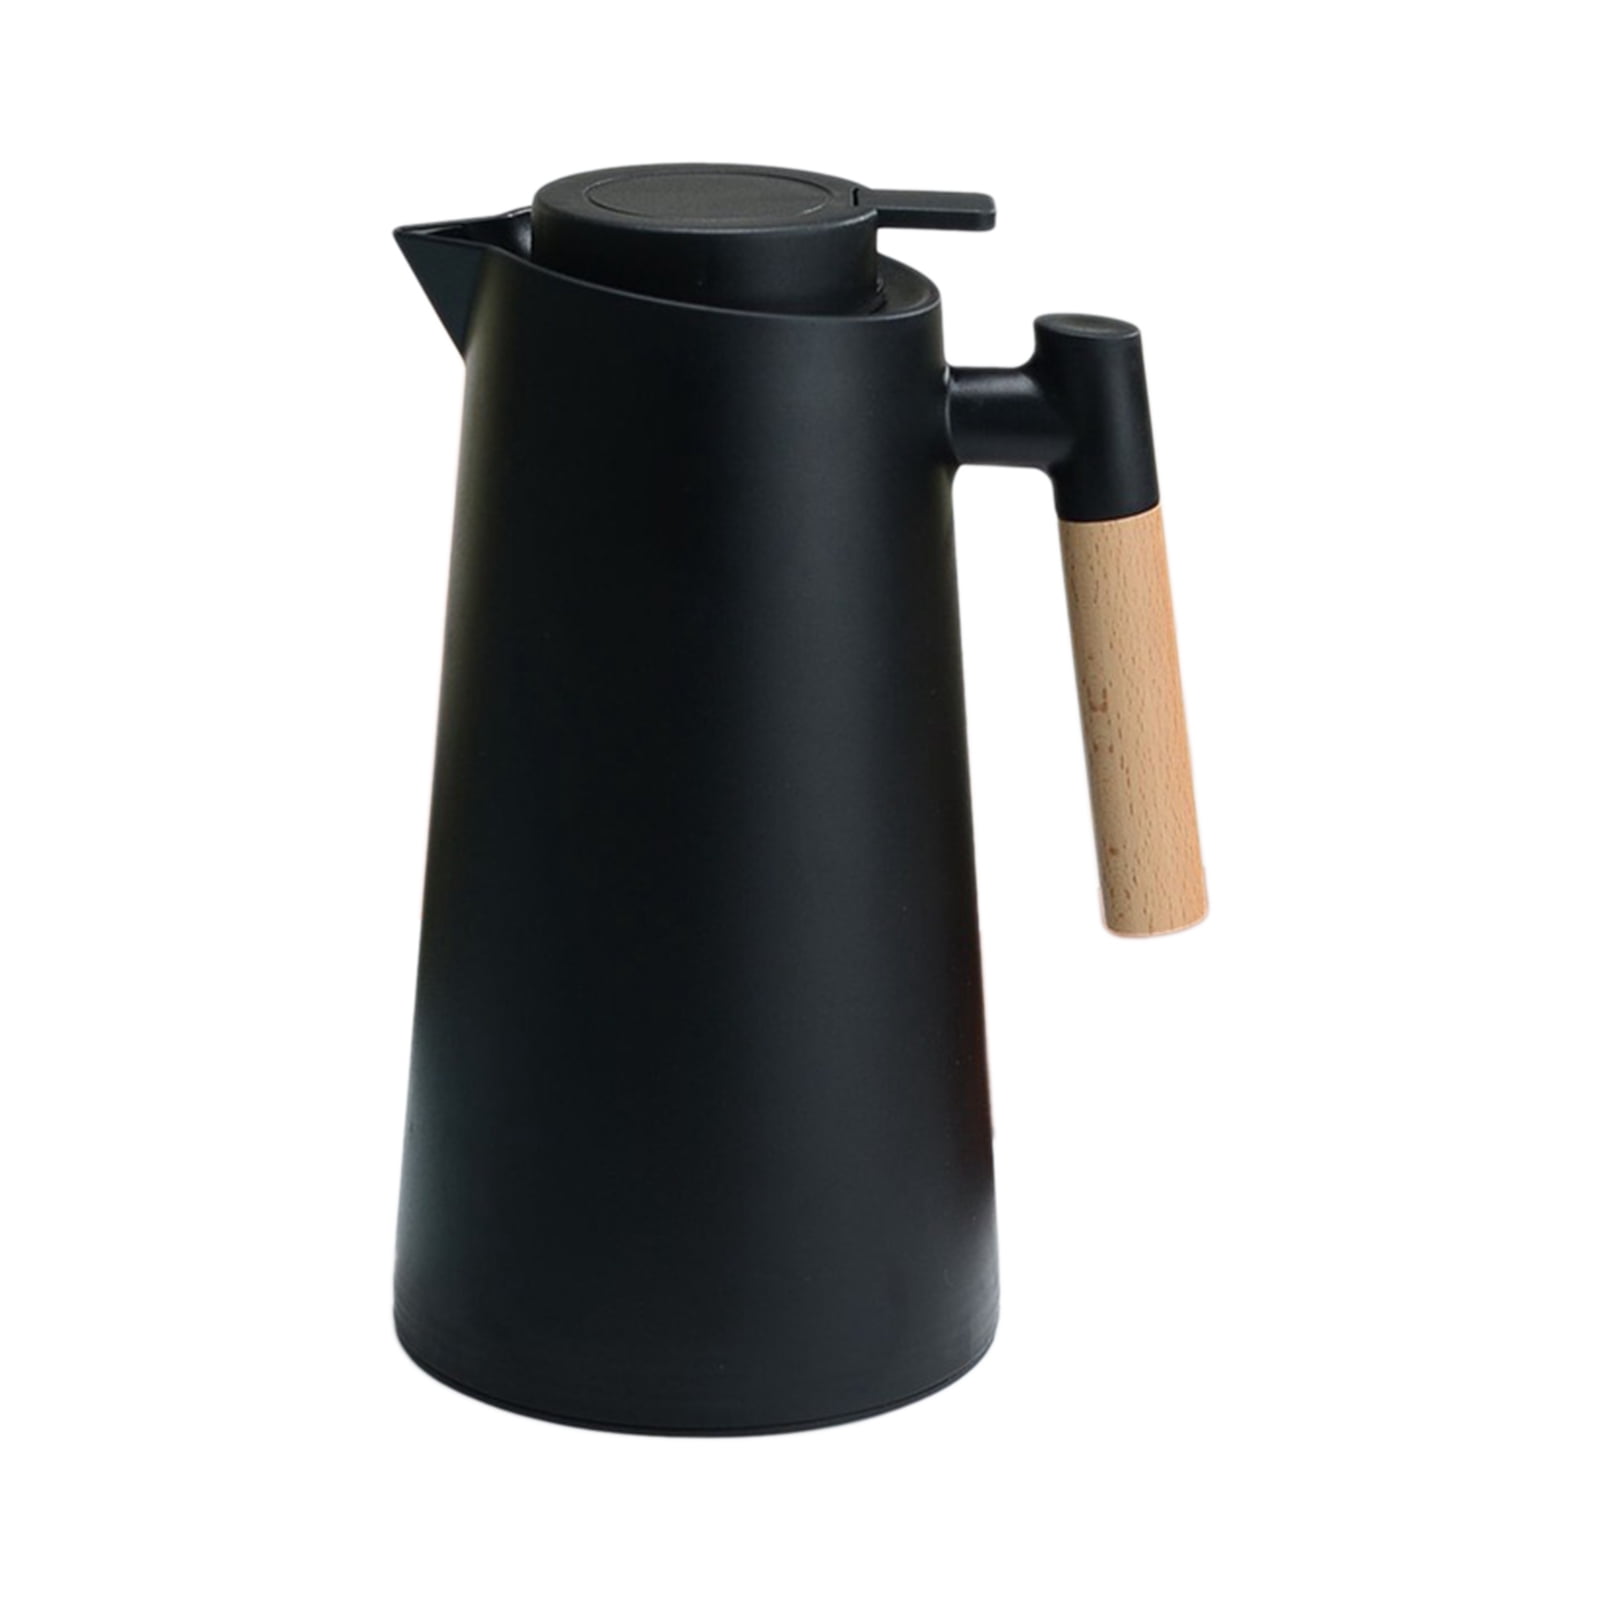 Green 1l Thermal Coffee Carafe Double Walled Vacuum Coffee Pot Thermal  Carafe Thermos Pot With Wood Handle Water Kettle Insulated Flask Tea Carafe  Kee